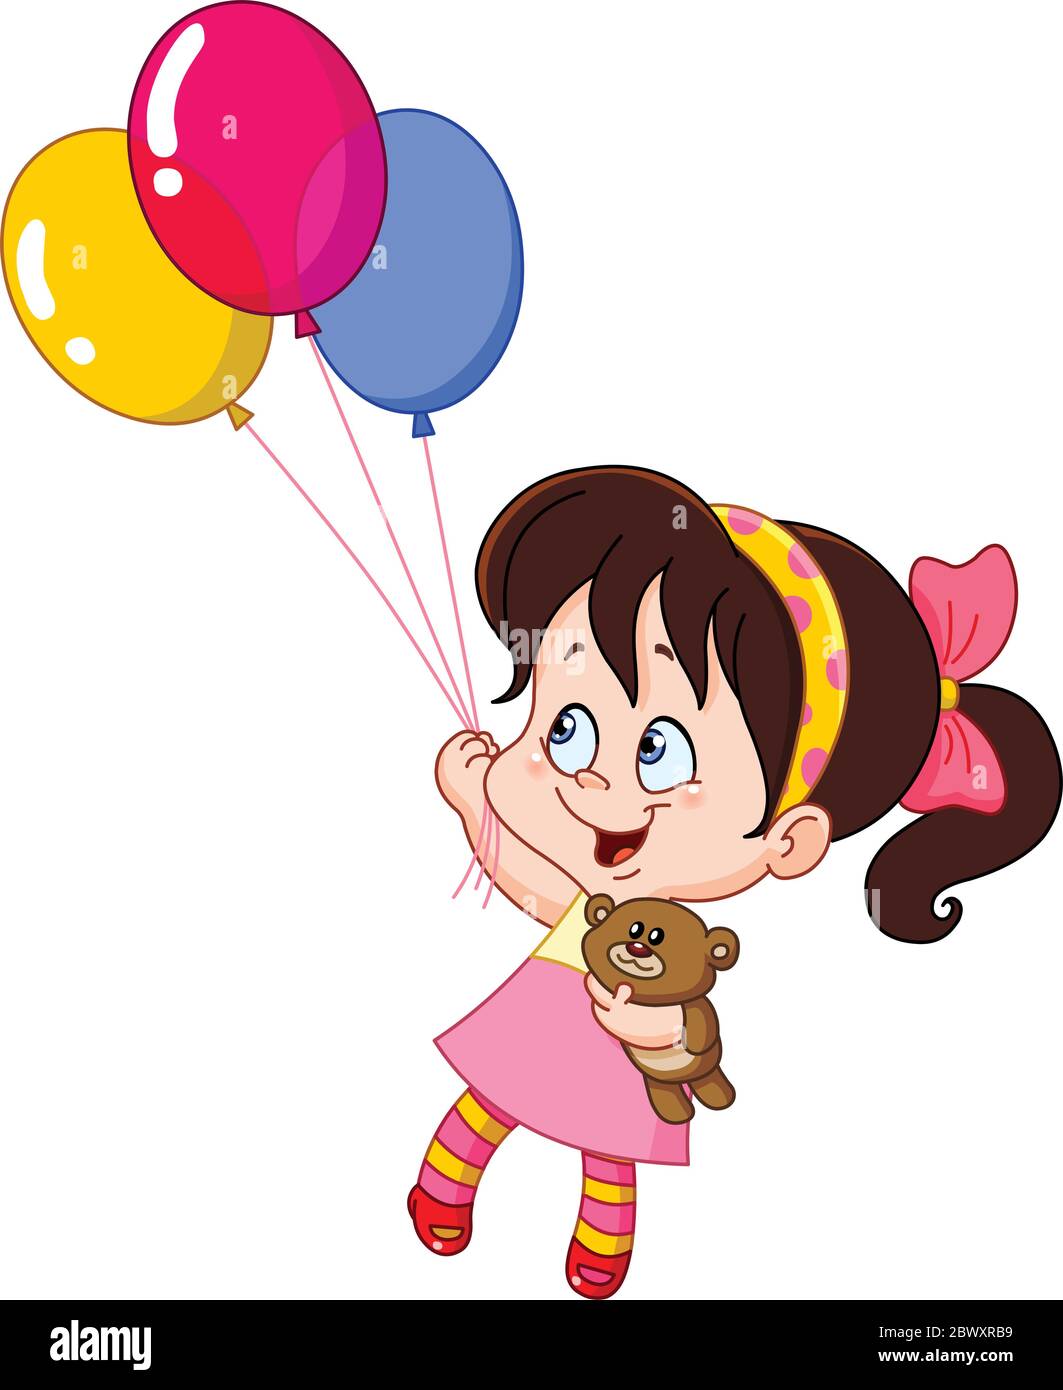 Little girl flying with balloons Stock Vector